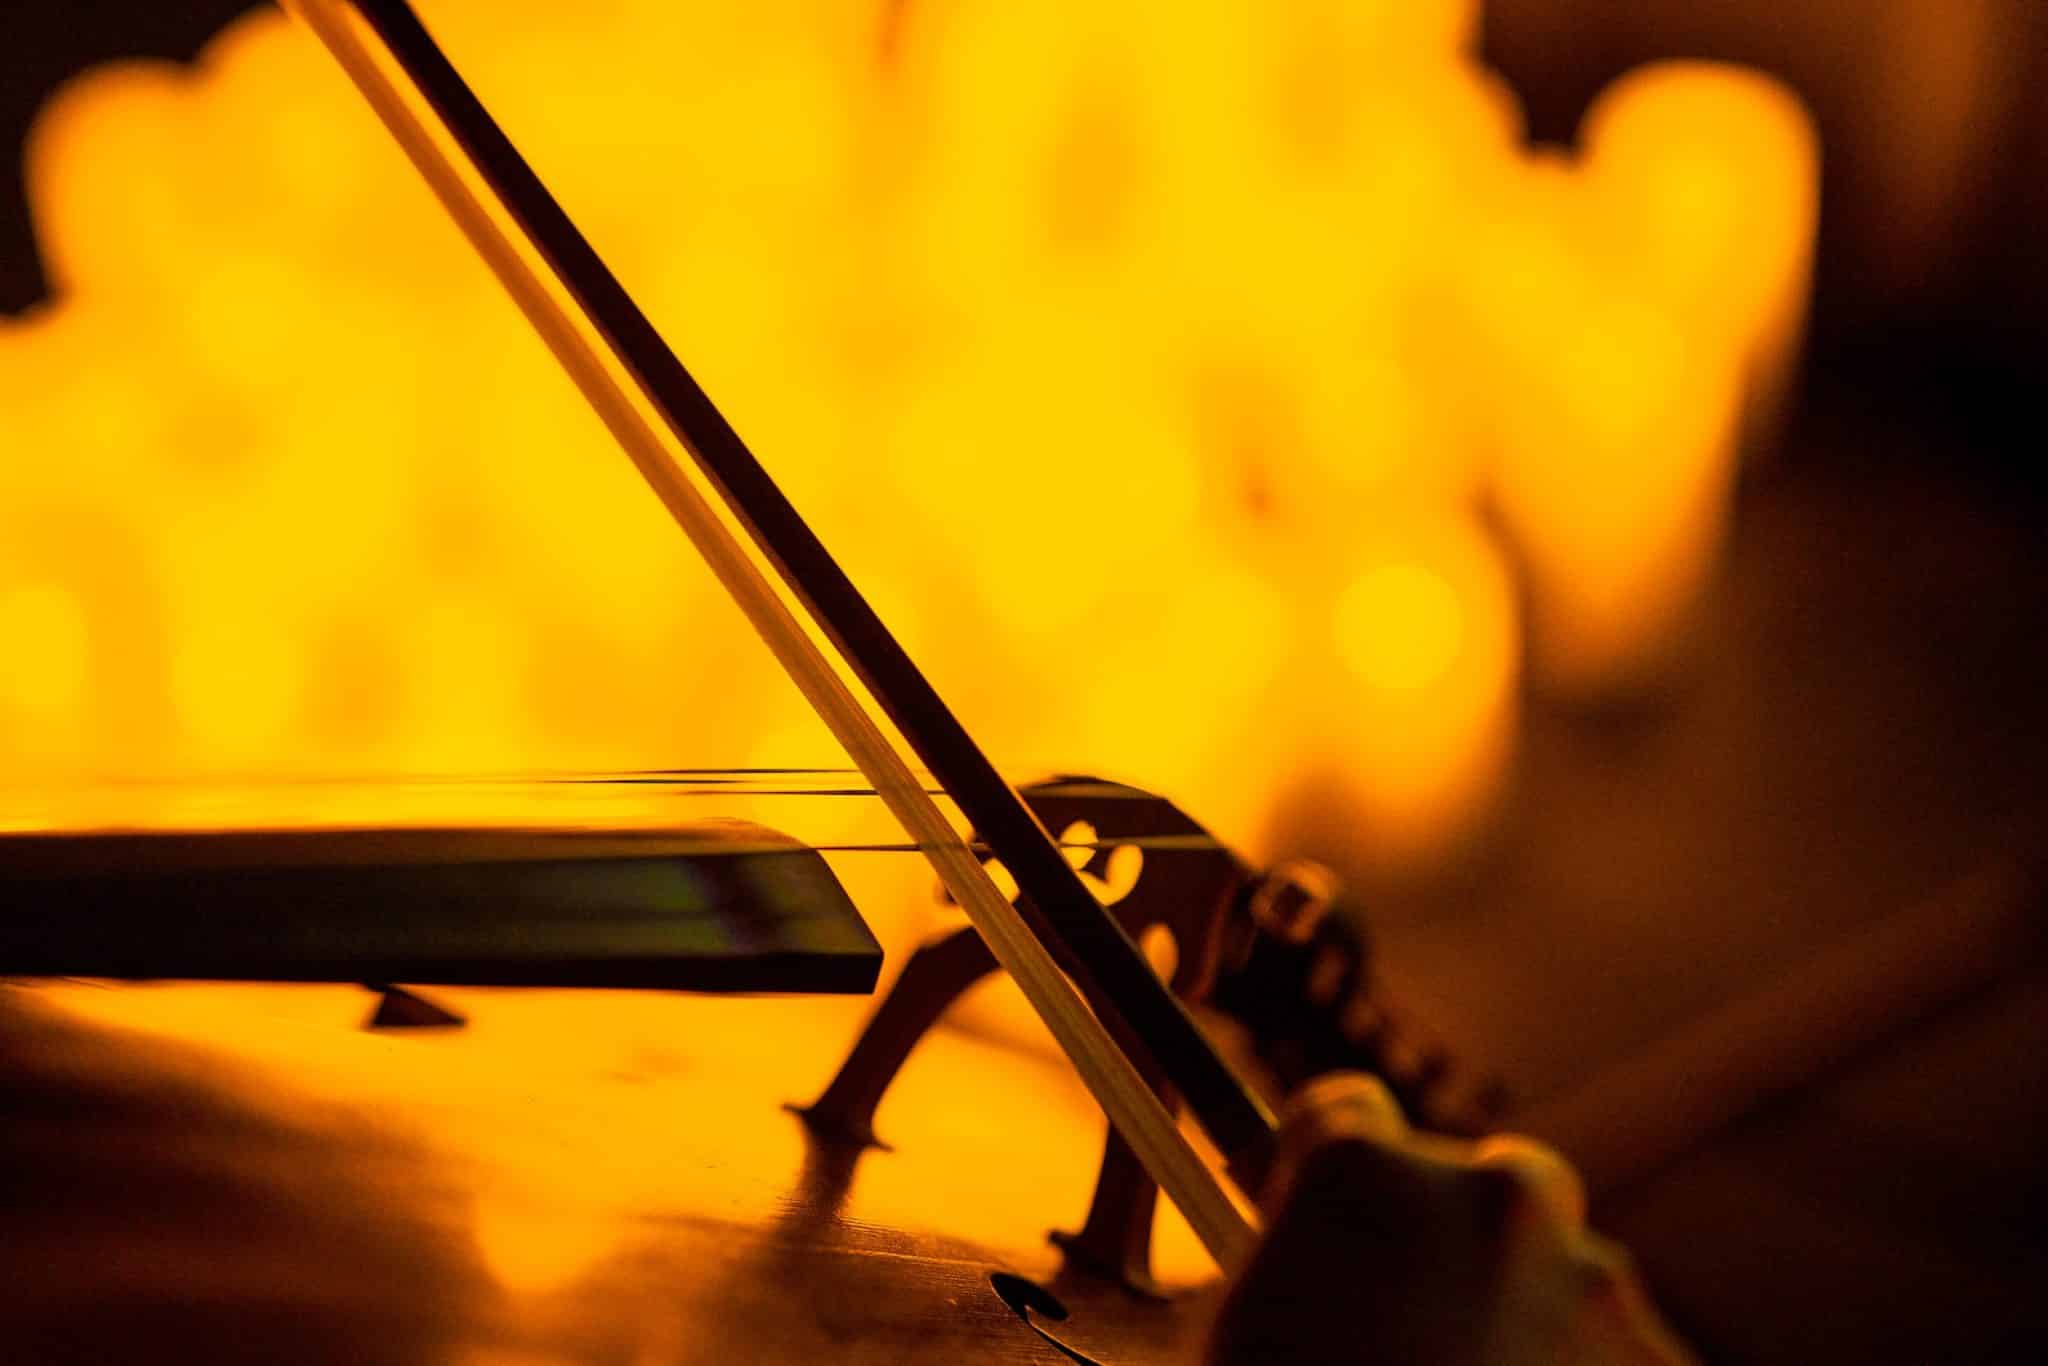 A close-up of a bow being used to play a string instrument with the blurry glow of candlelight in the background.